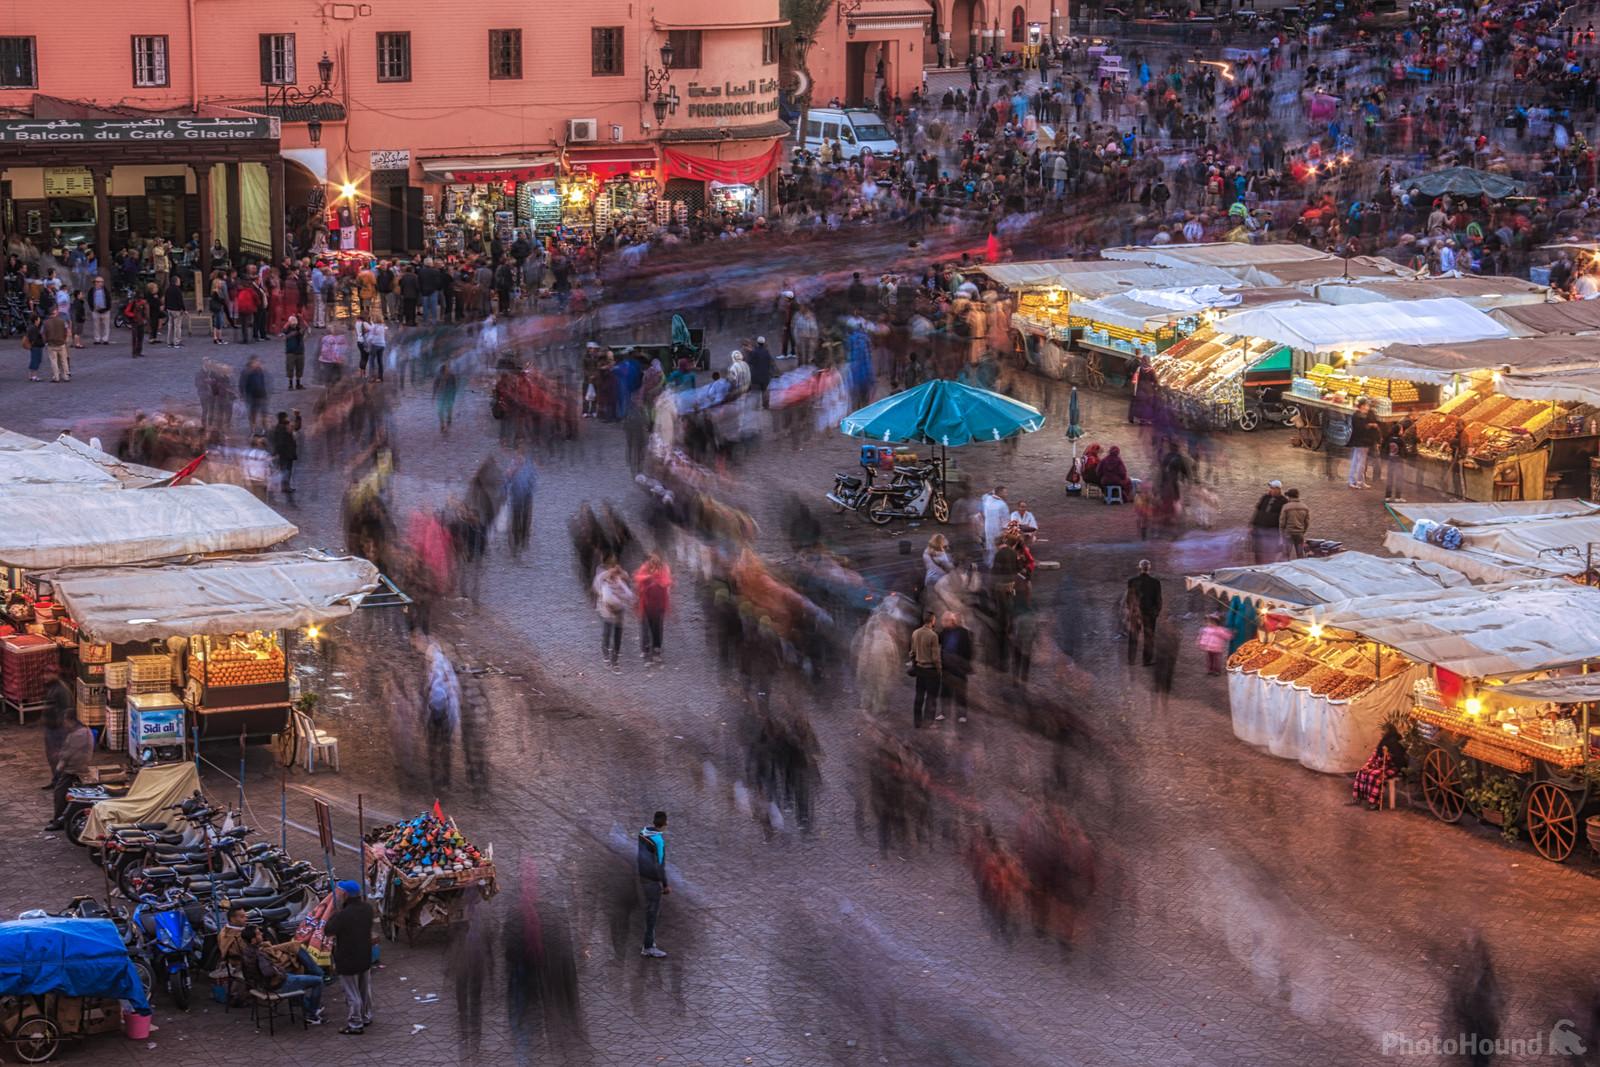 Image of Jemaa el-Fna from above by Jules Renahan